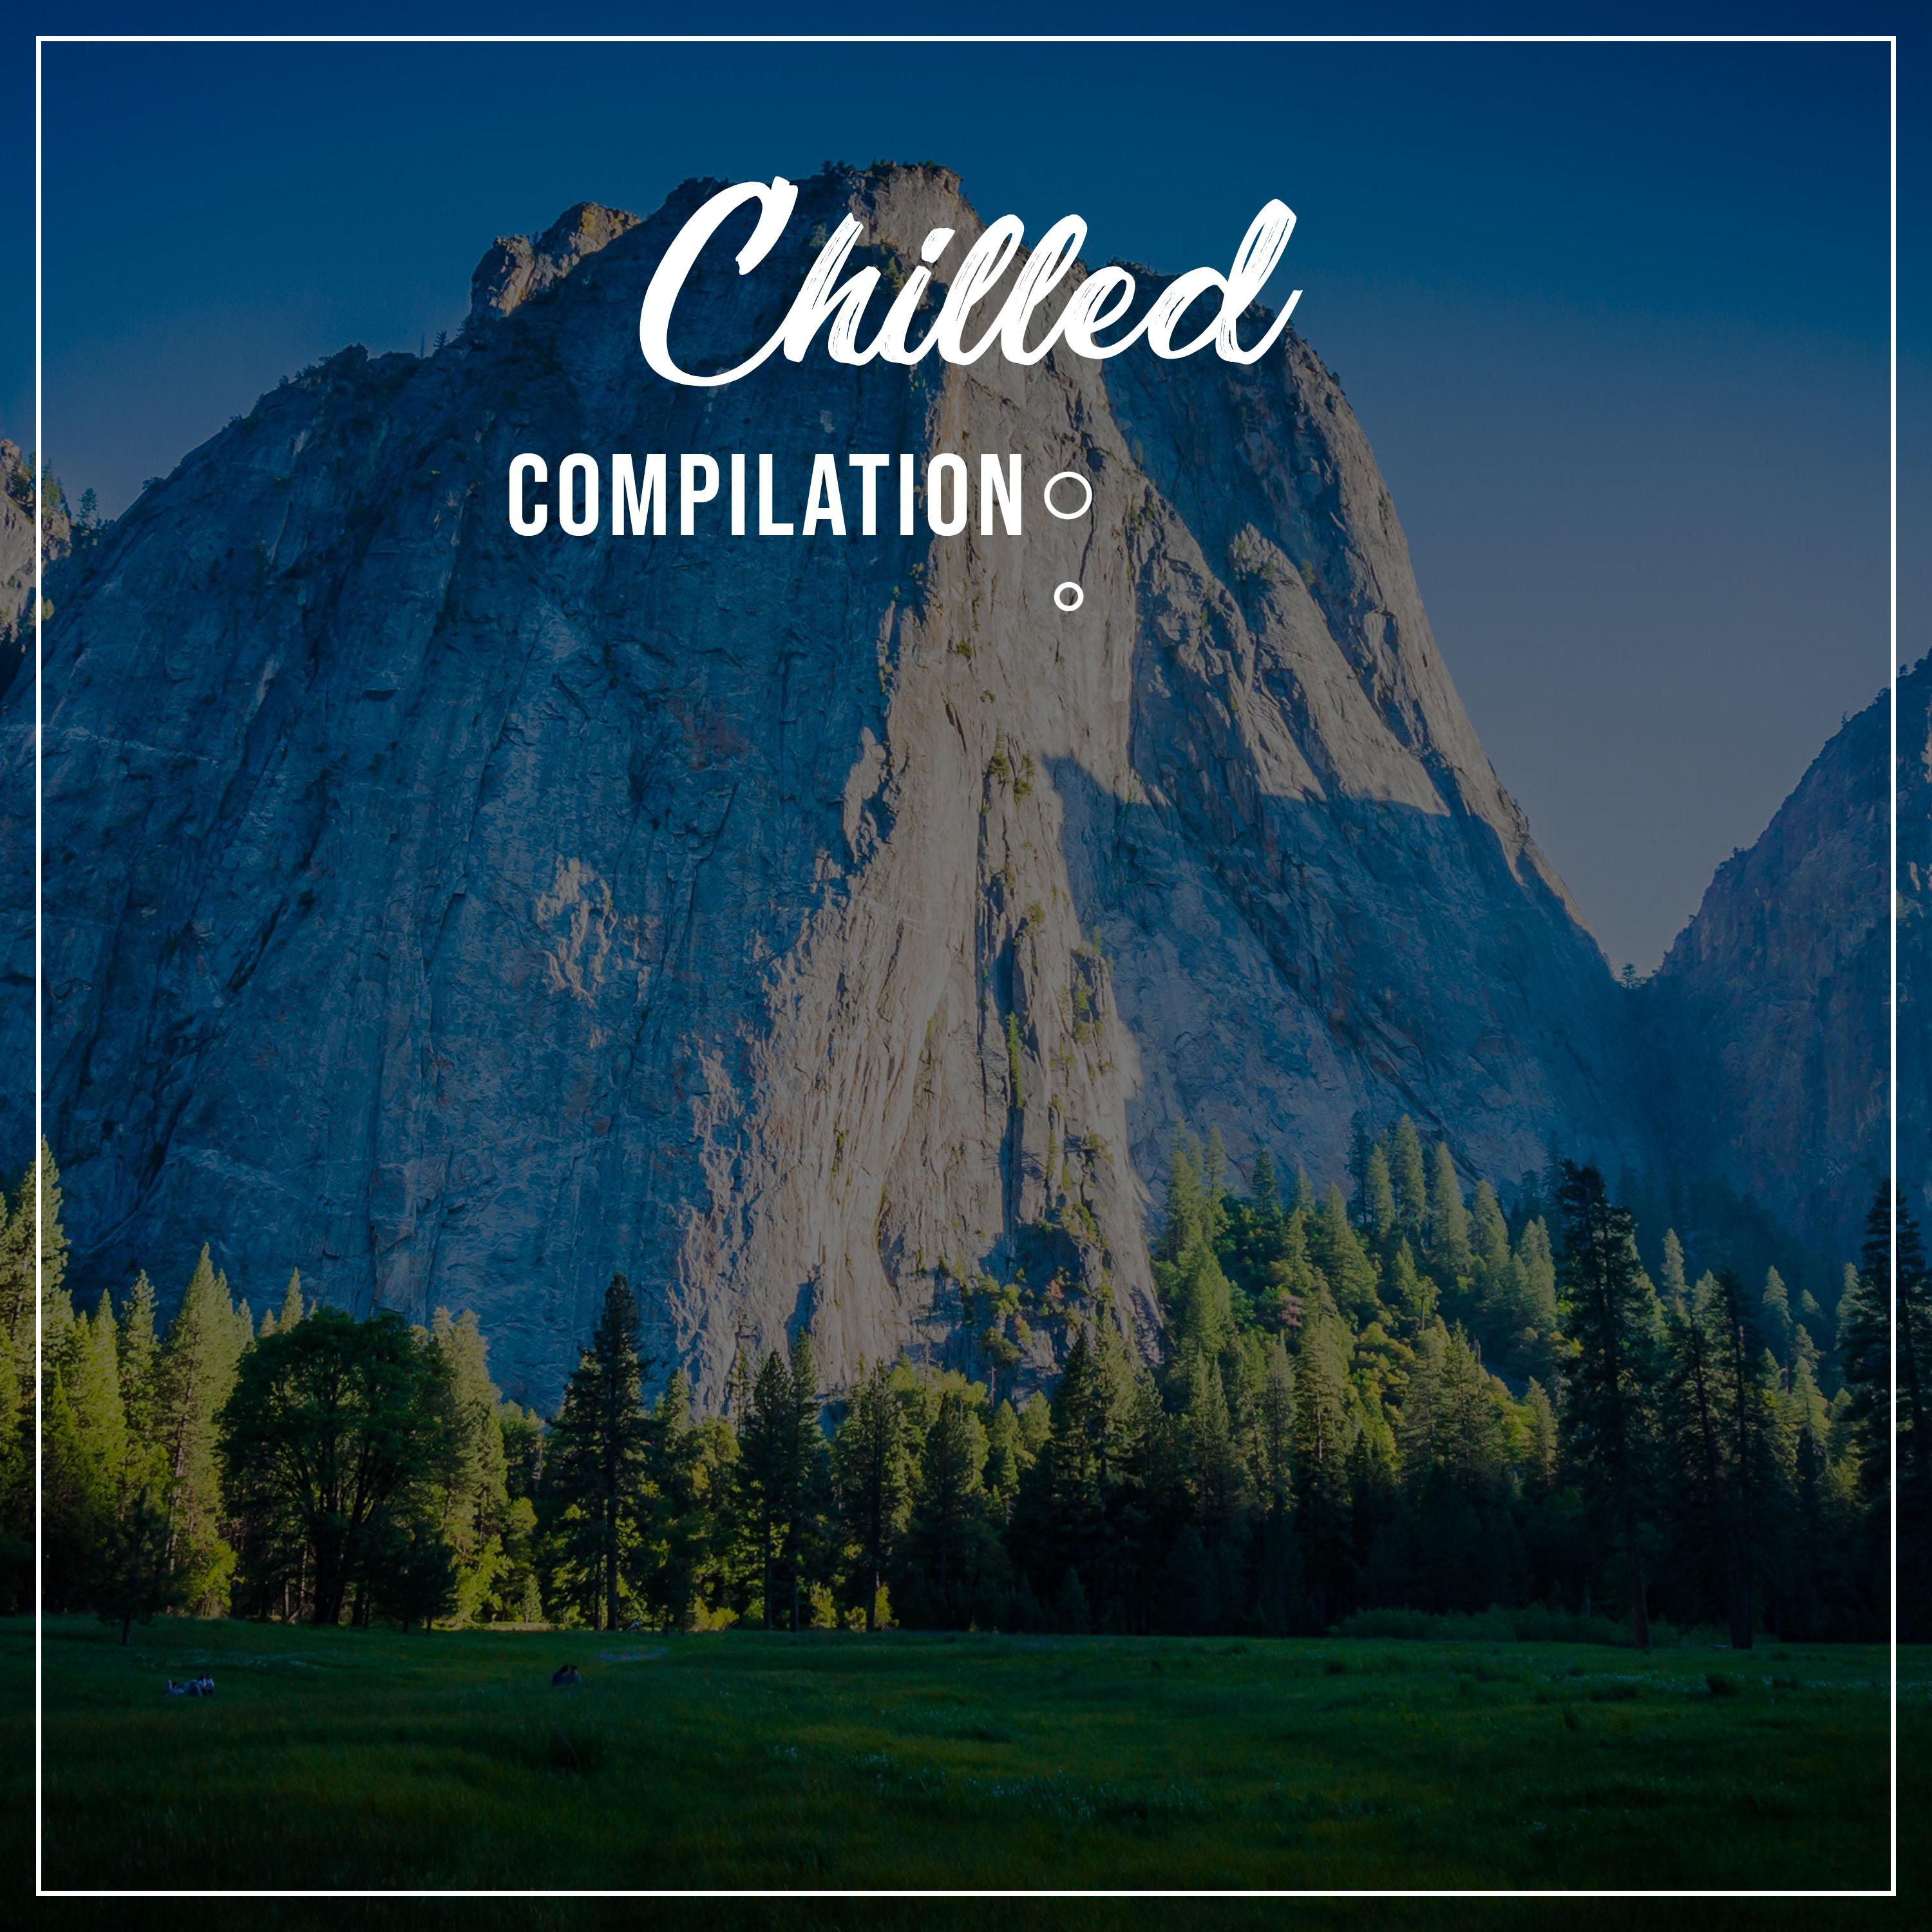 #15 Chilled Compilation for Guided Meditation & Relaxation